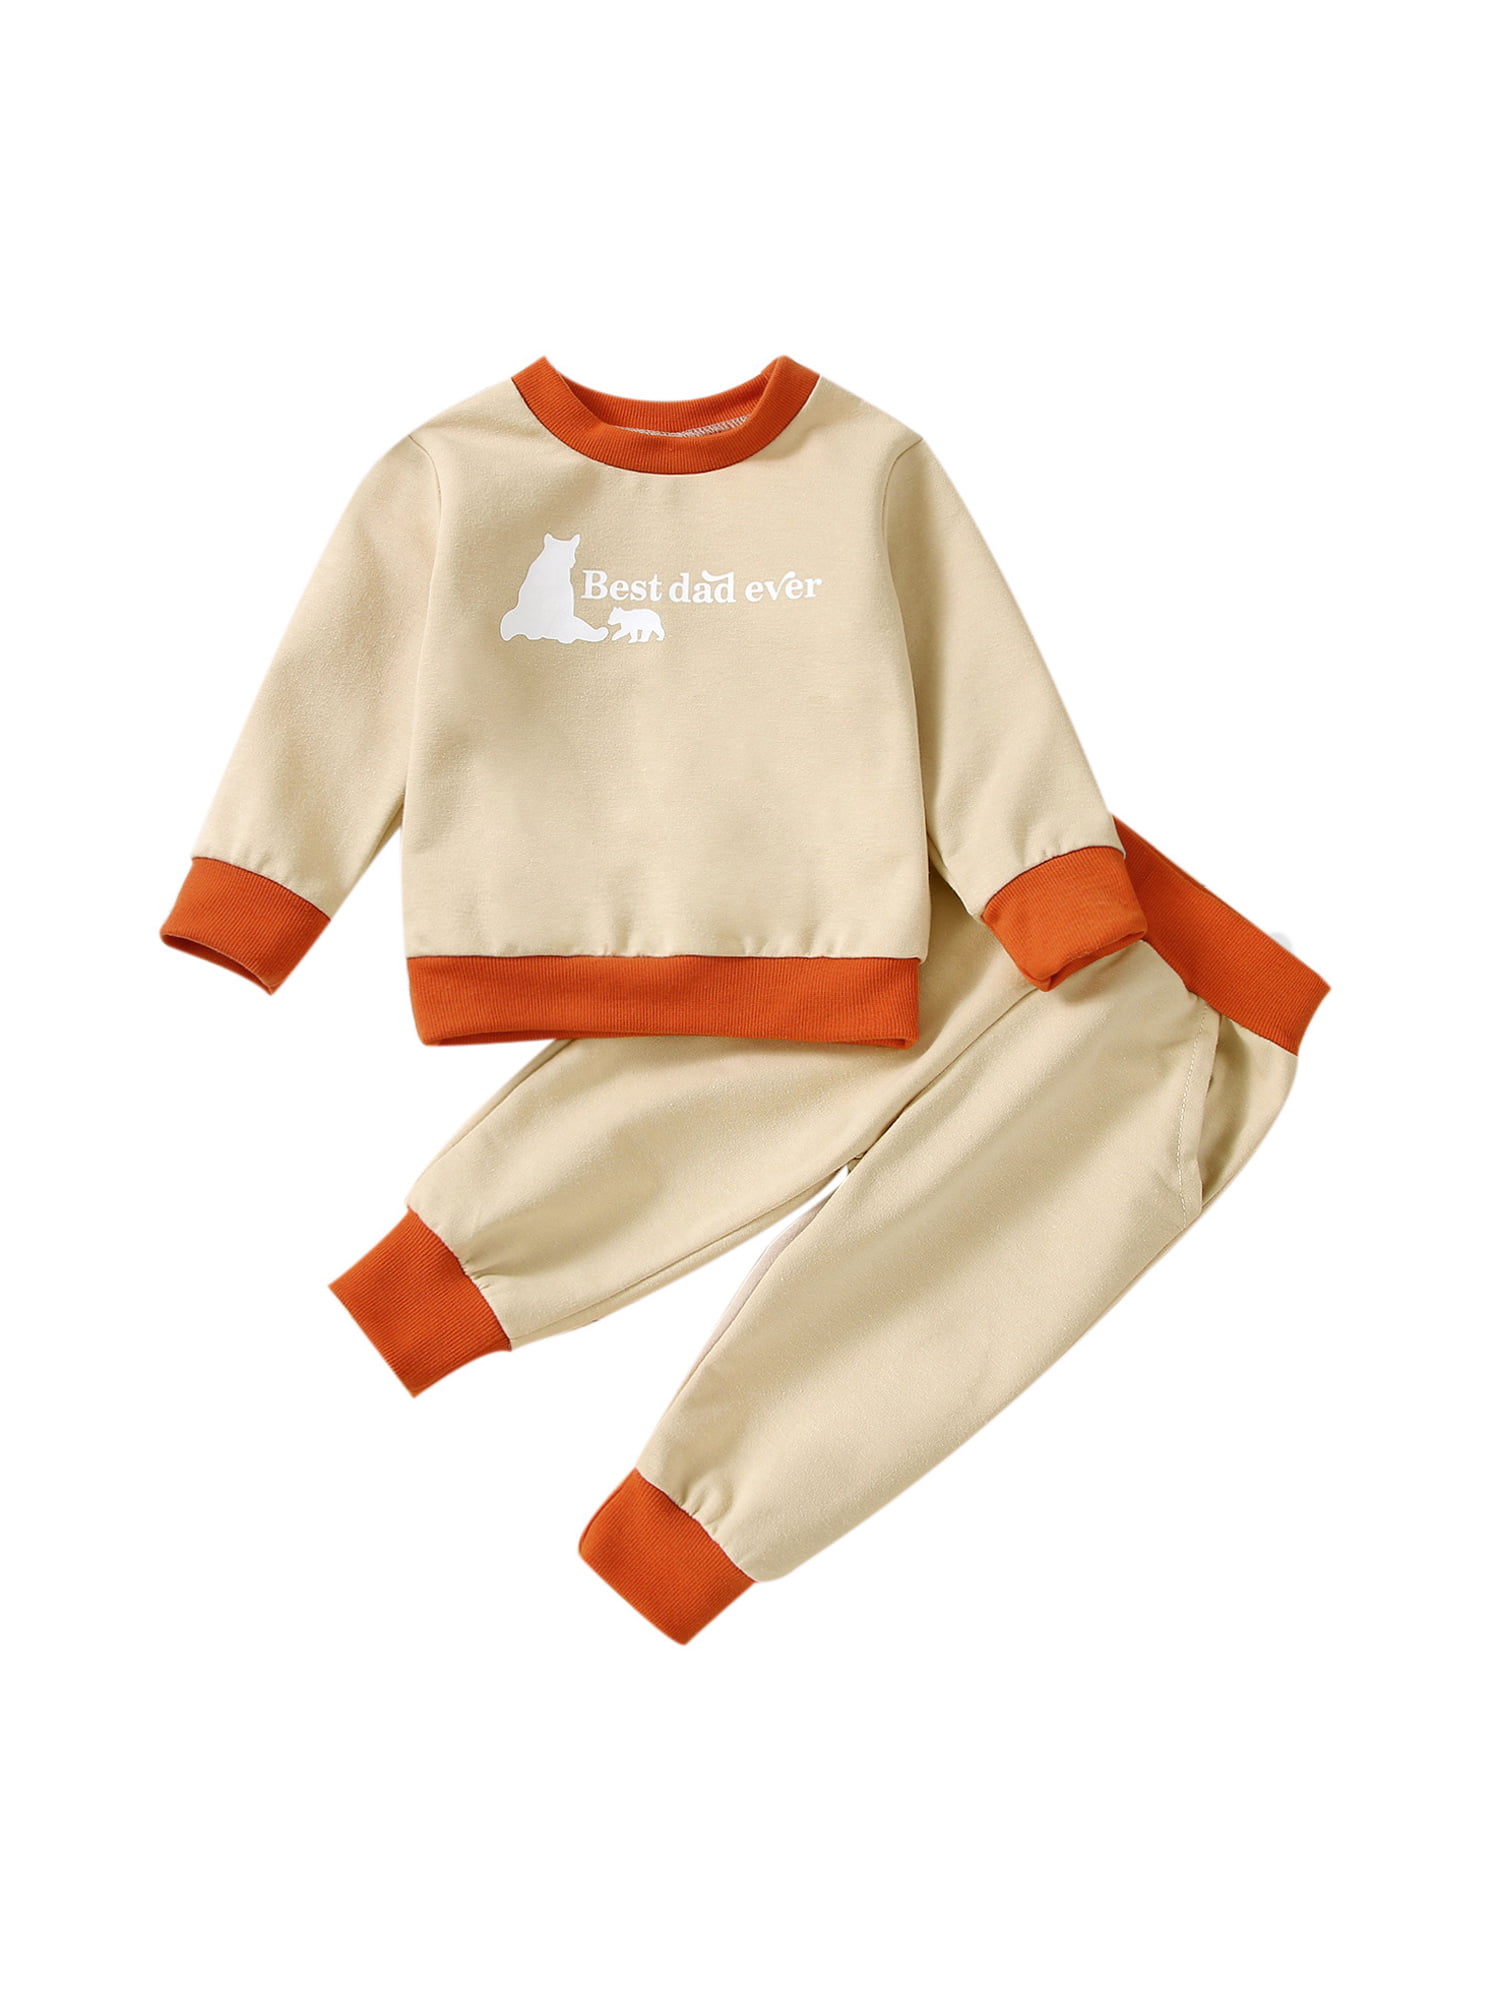 Long Pants Set Toddler Baby Boy Outfit Letter Printed Long Sleeve T-shirt Tops 